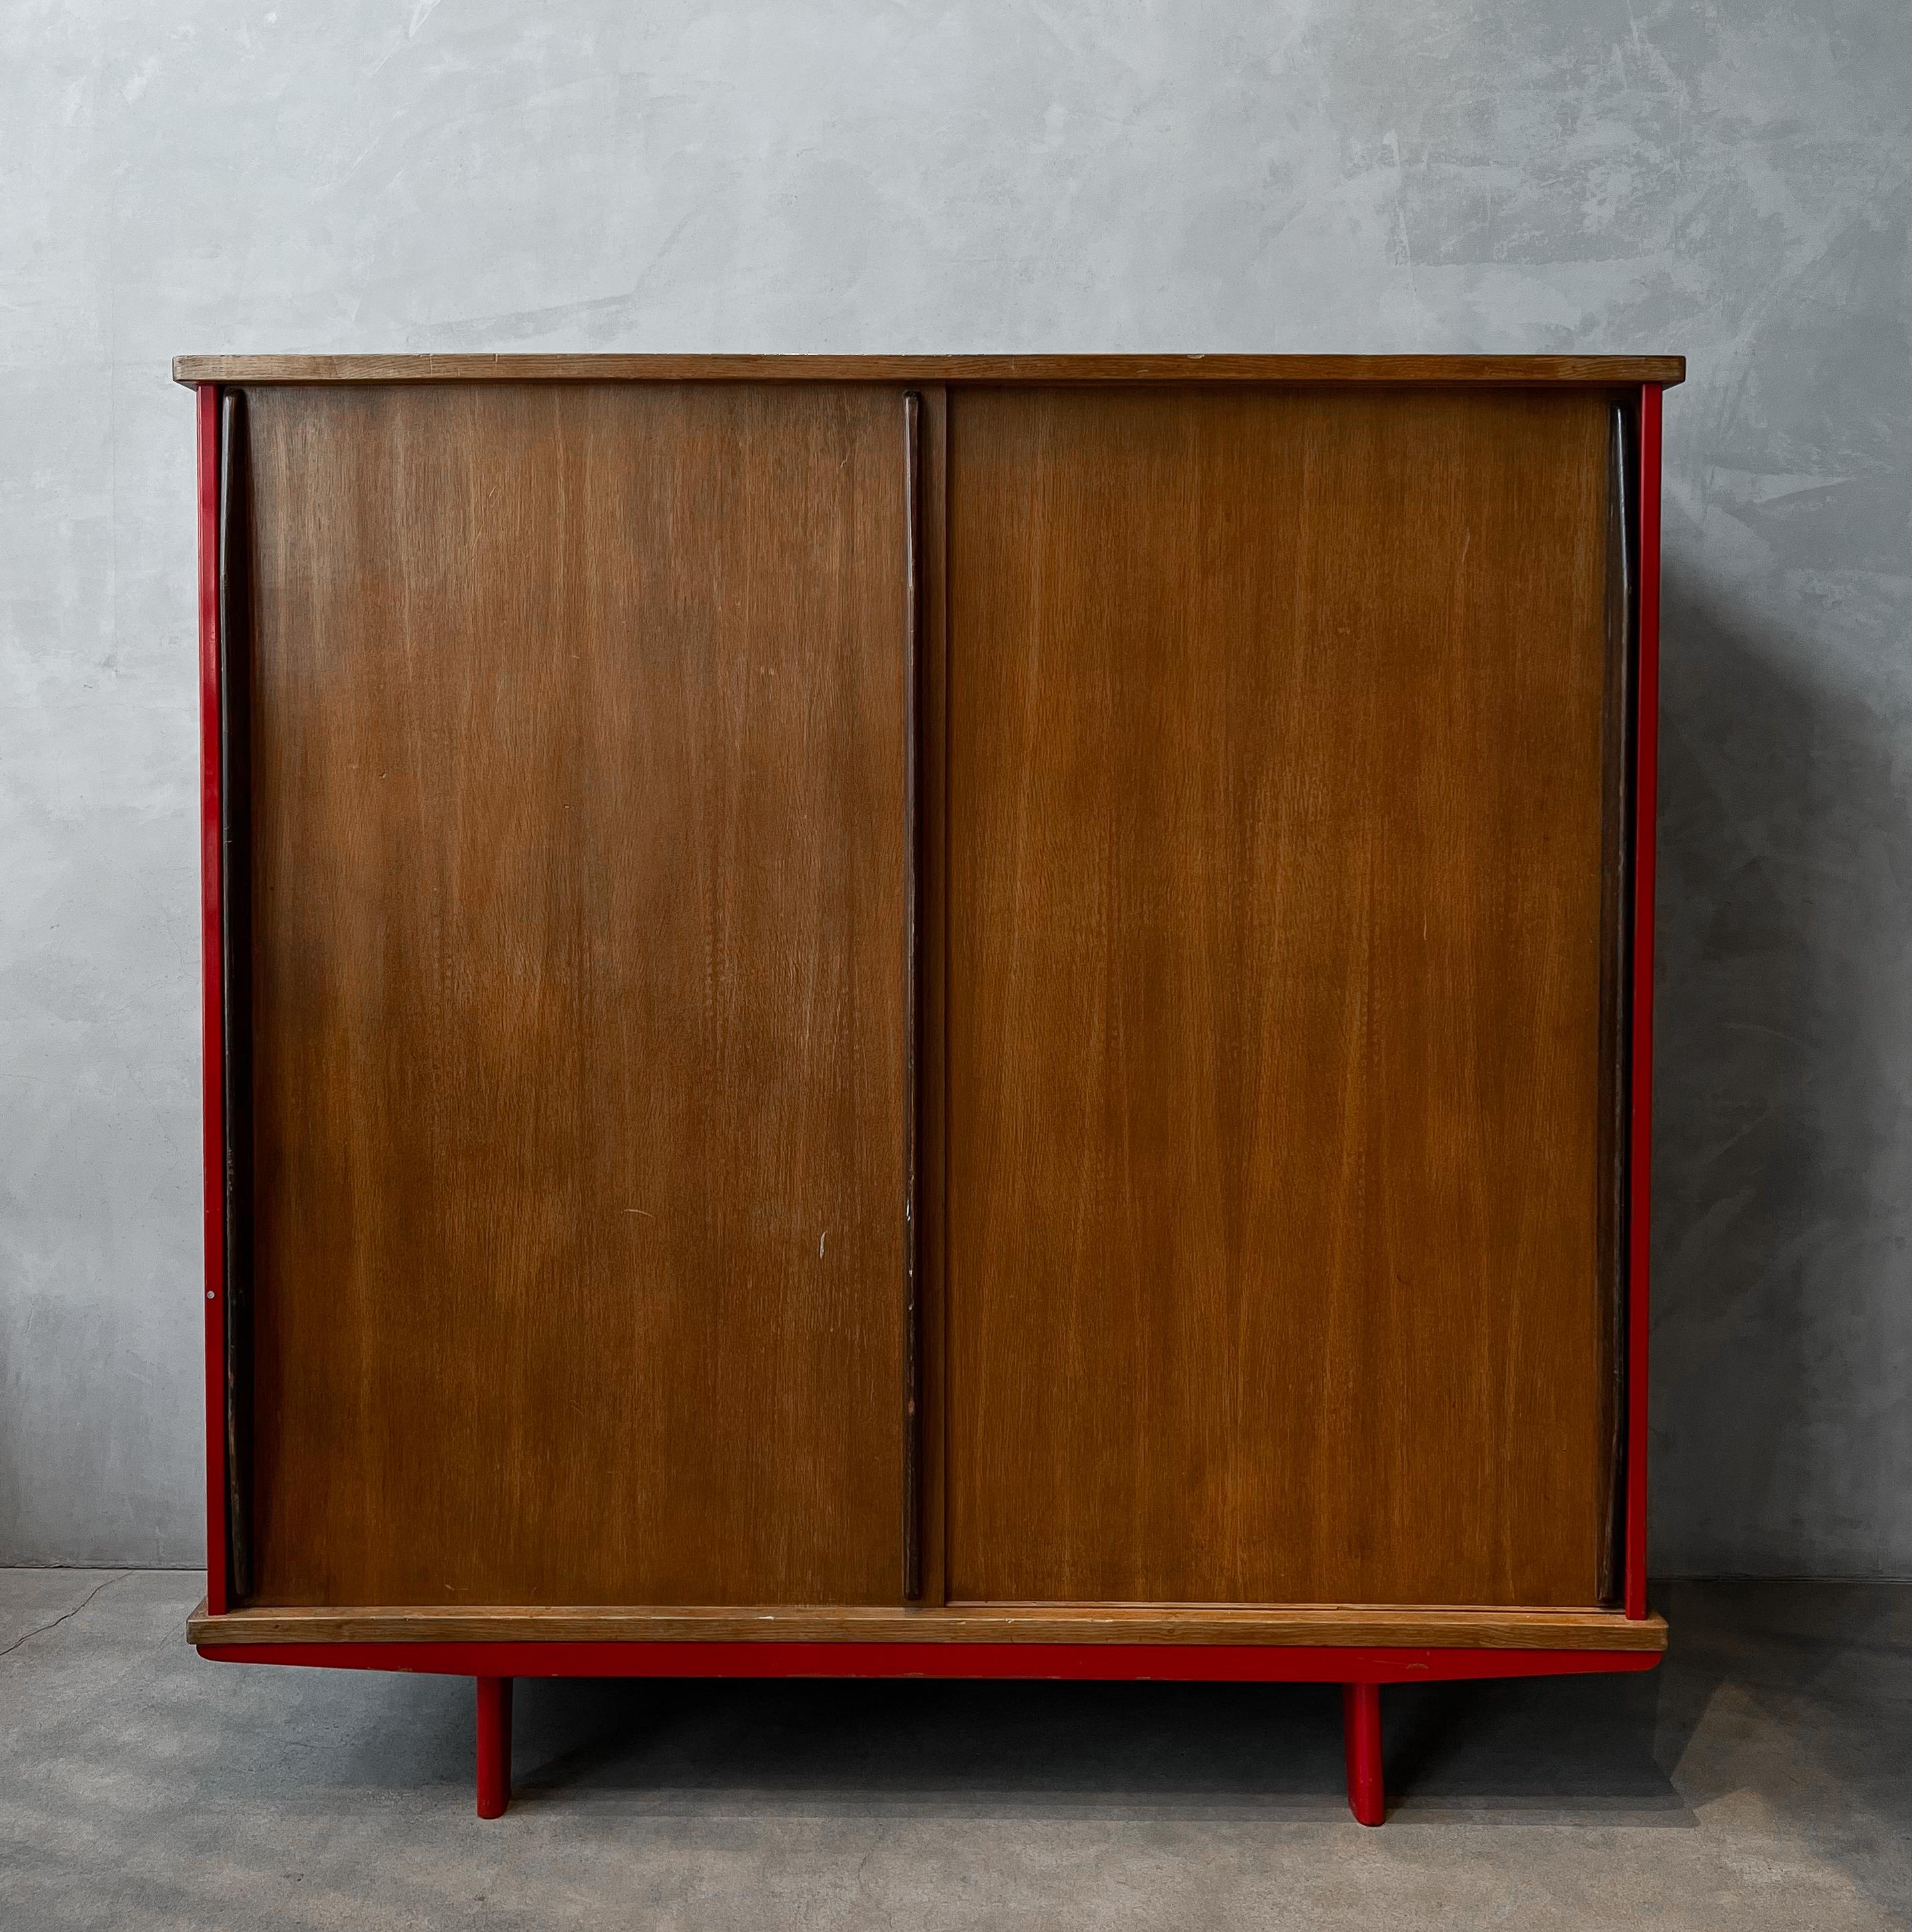 The AG 11 Wardrobe, variant, dating 1945 is an iconic piece manufactured by Ateliers Jean Prouvé. This exemplar presents prime condition and beautiful patina. Certificate of authenticity will be provided. 